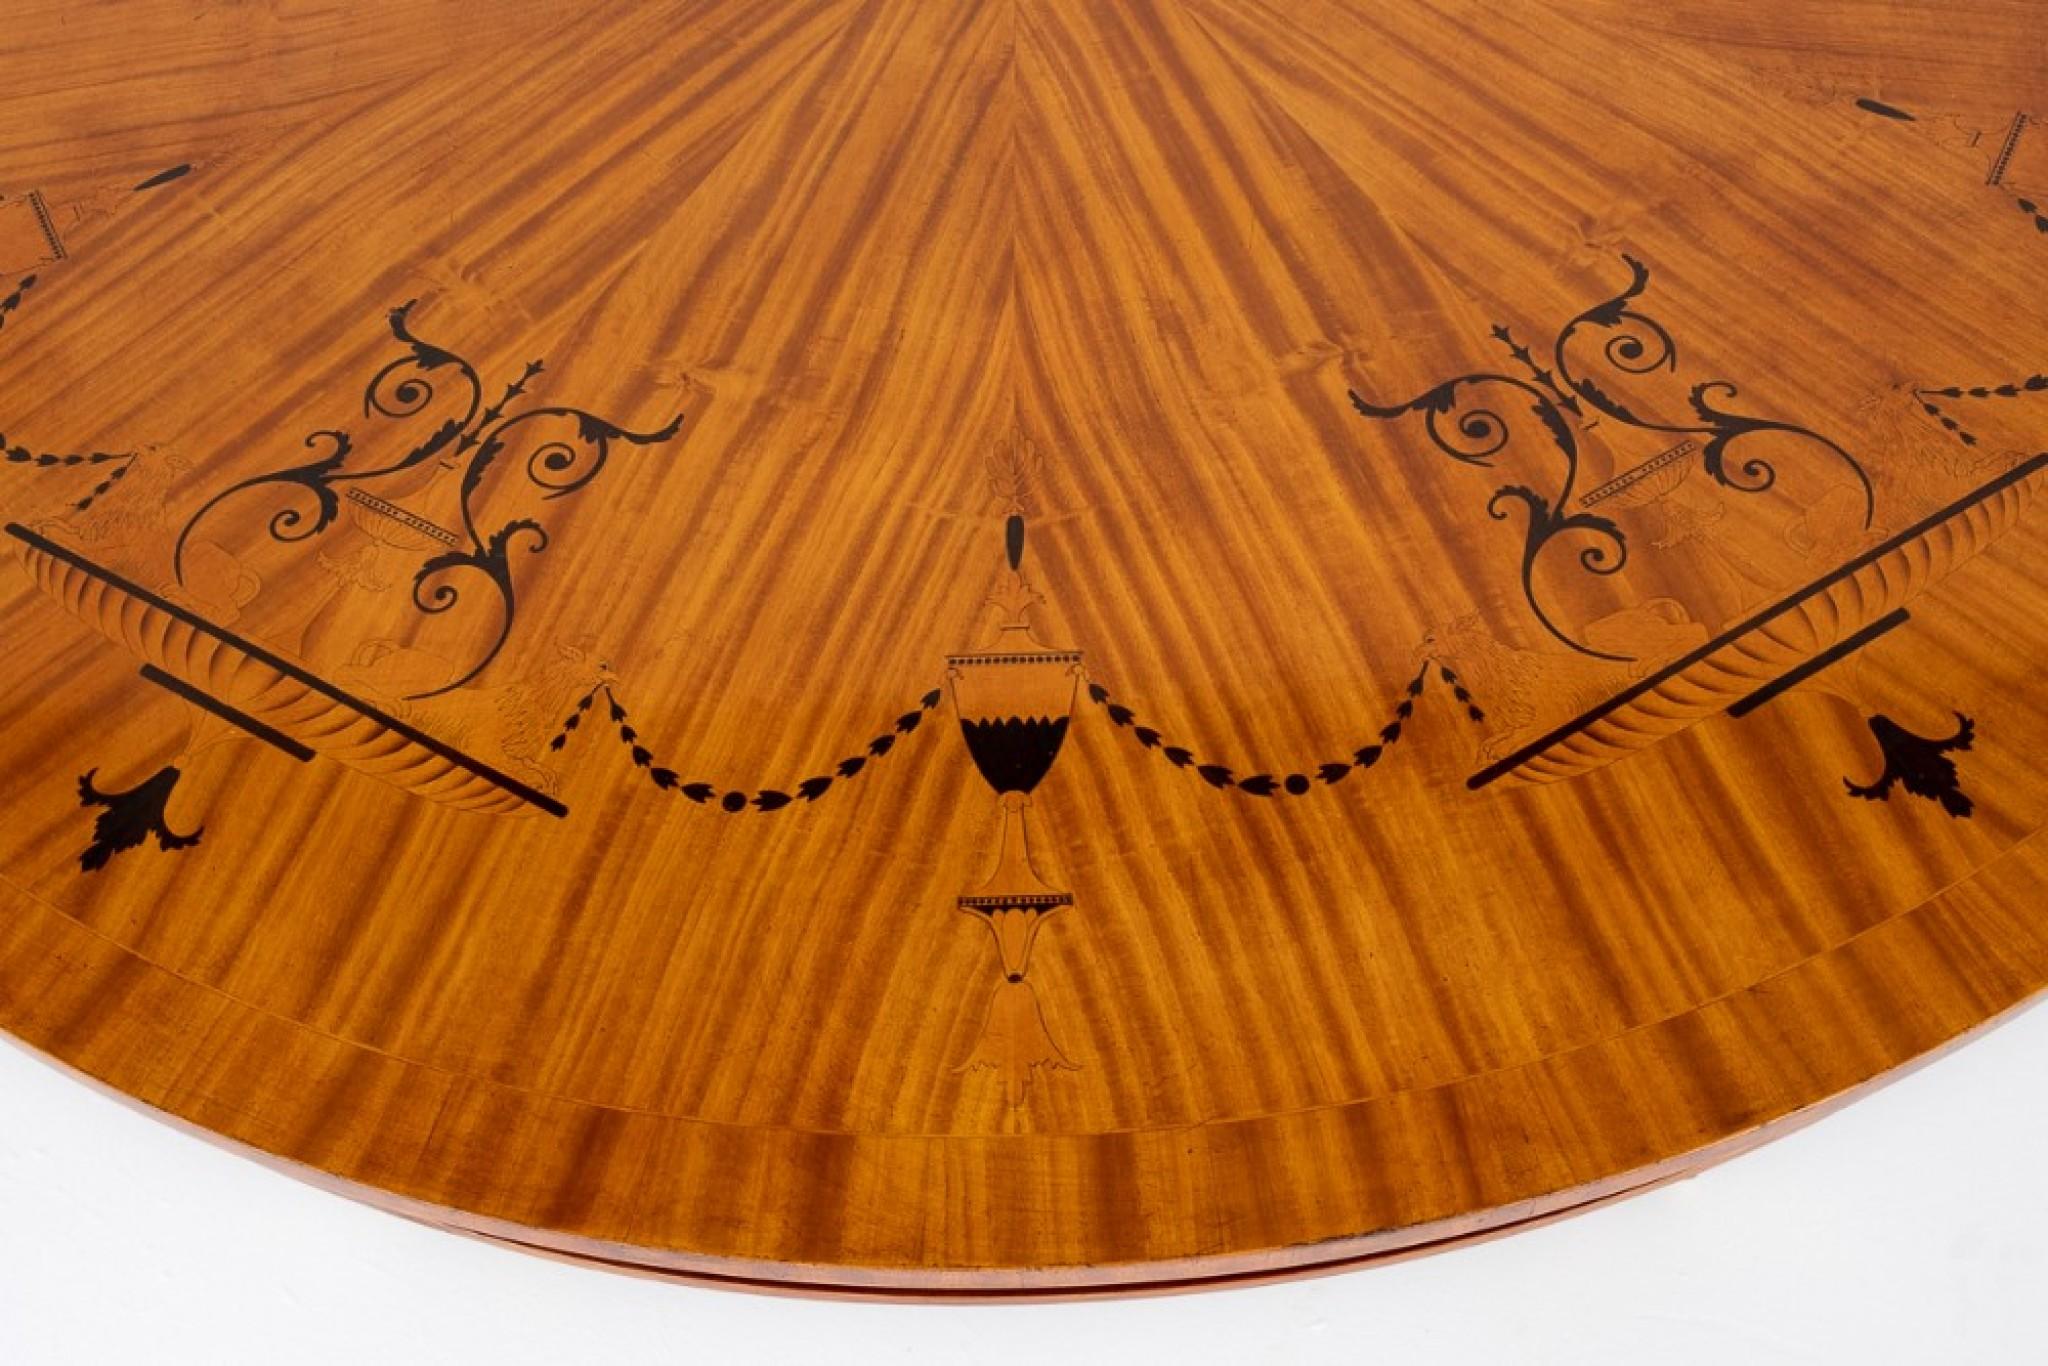 Regency Revival satinwood centre table.
circa 1900
The top of the table featuring segmented satinwood veneers with stylised ebony and rosewood inlays.
The base of the table featuring satinwood swept legs with rosewood crossbanding with brass box